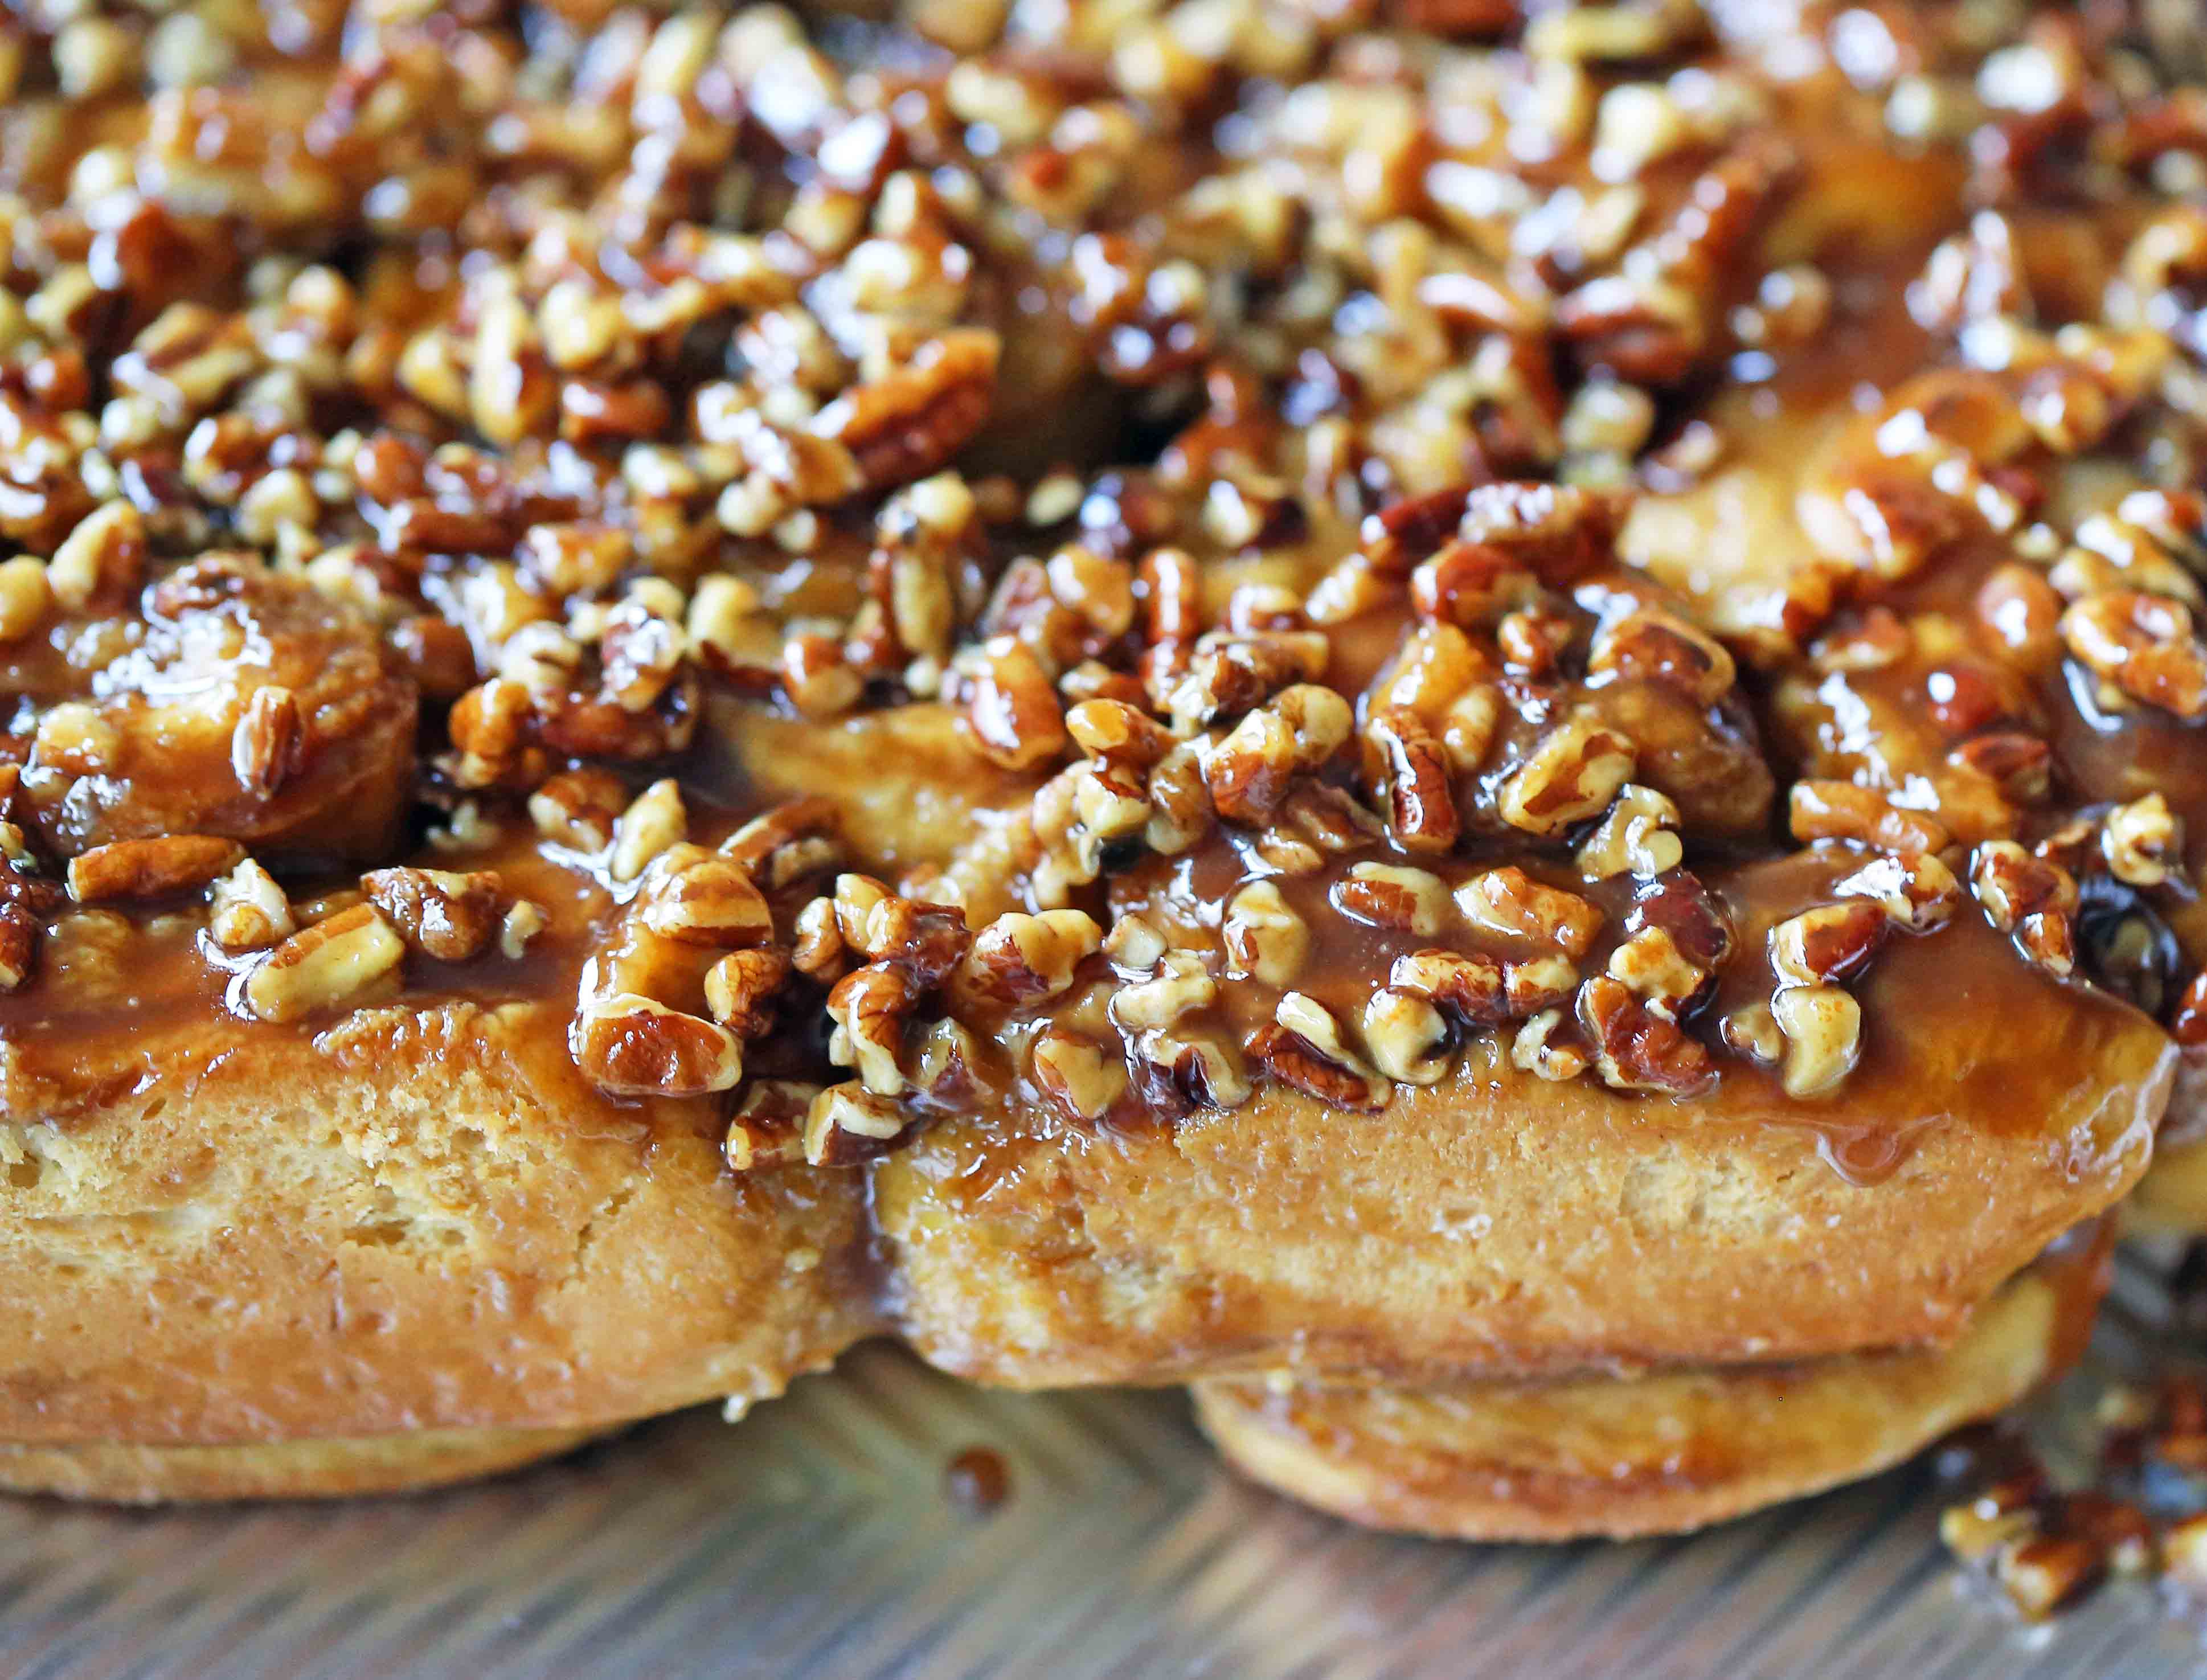 Caramel Pecan Rolls Homemade sweet rolls with rich caramel sauce and pecans. The perfect pecan sticky buns recipe! How to make homemade sticky buns from scratch. www.modernhoney.com #stickybuns #pecanrolls #caramelpecanrolls #caramelrolls #caramelstickybuns #pecanbuns